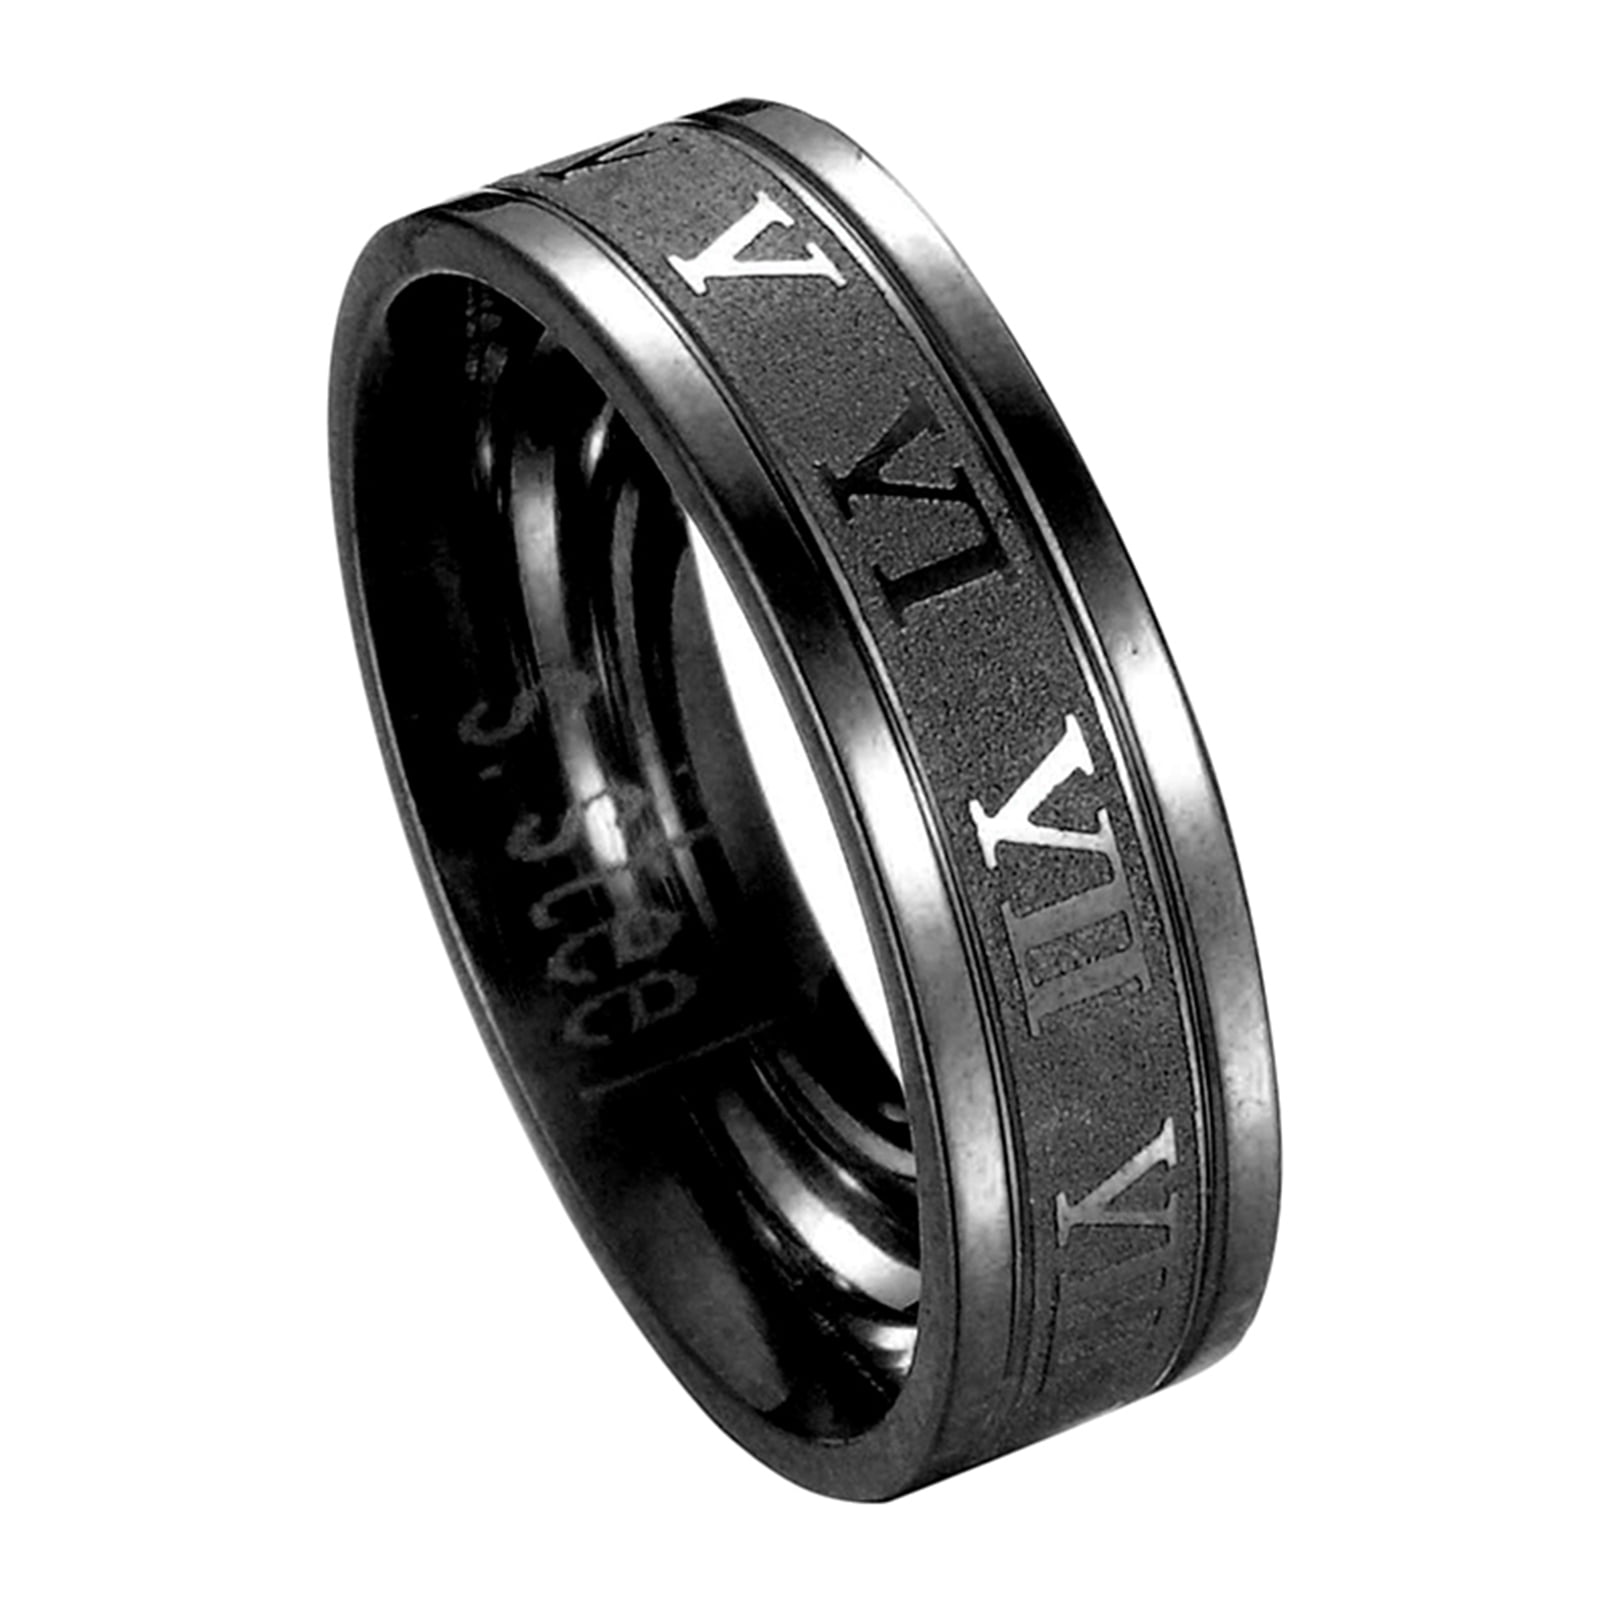 Wedding Bands Other Themed Bands Titanium 4mm Brushed and Polished Roman Numerals Band Size 6.5 